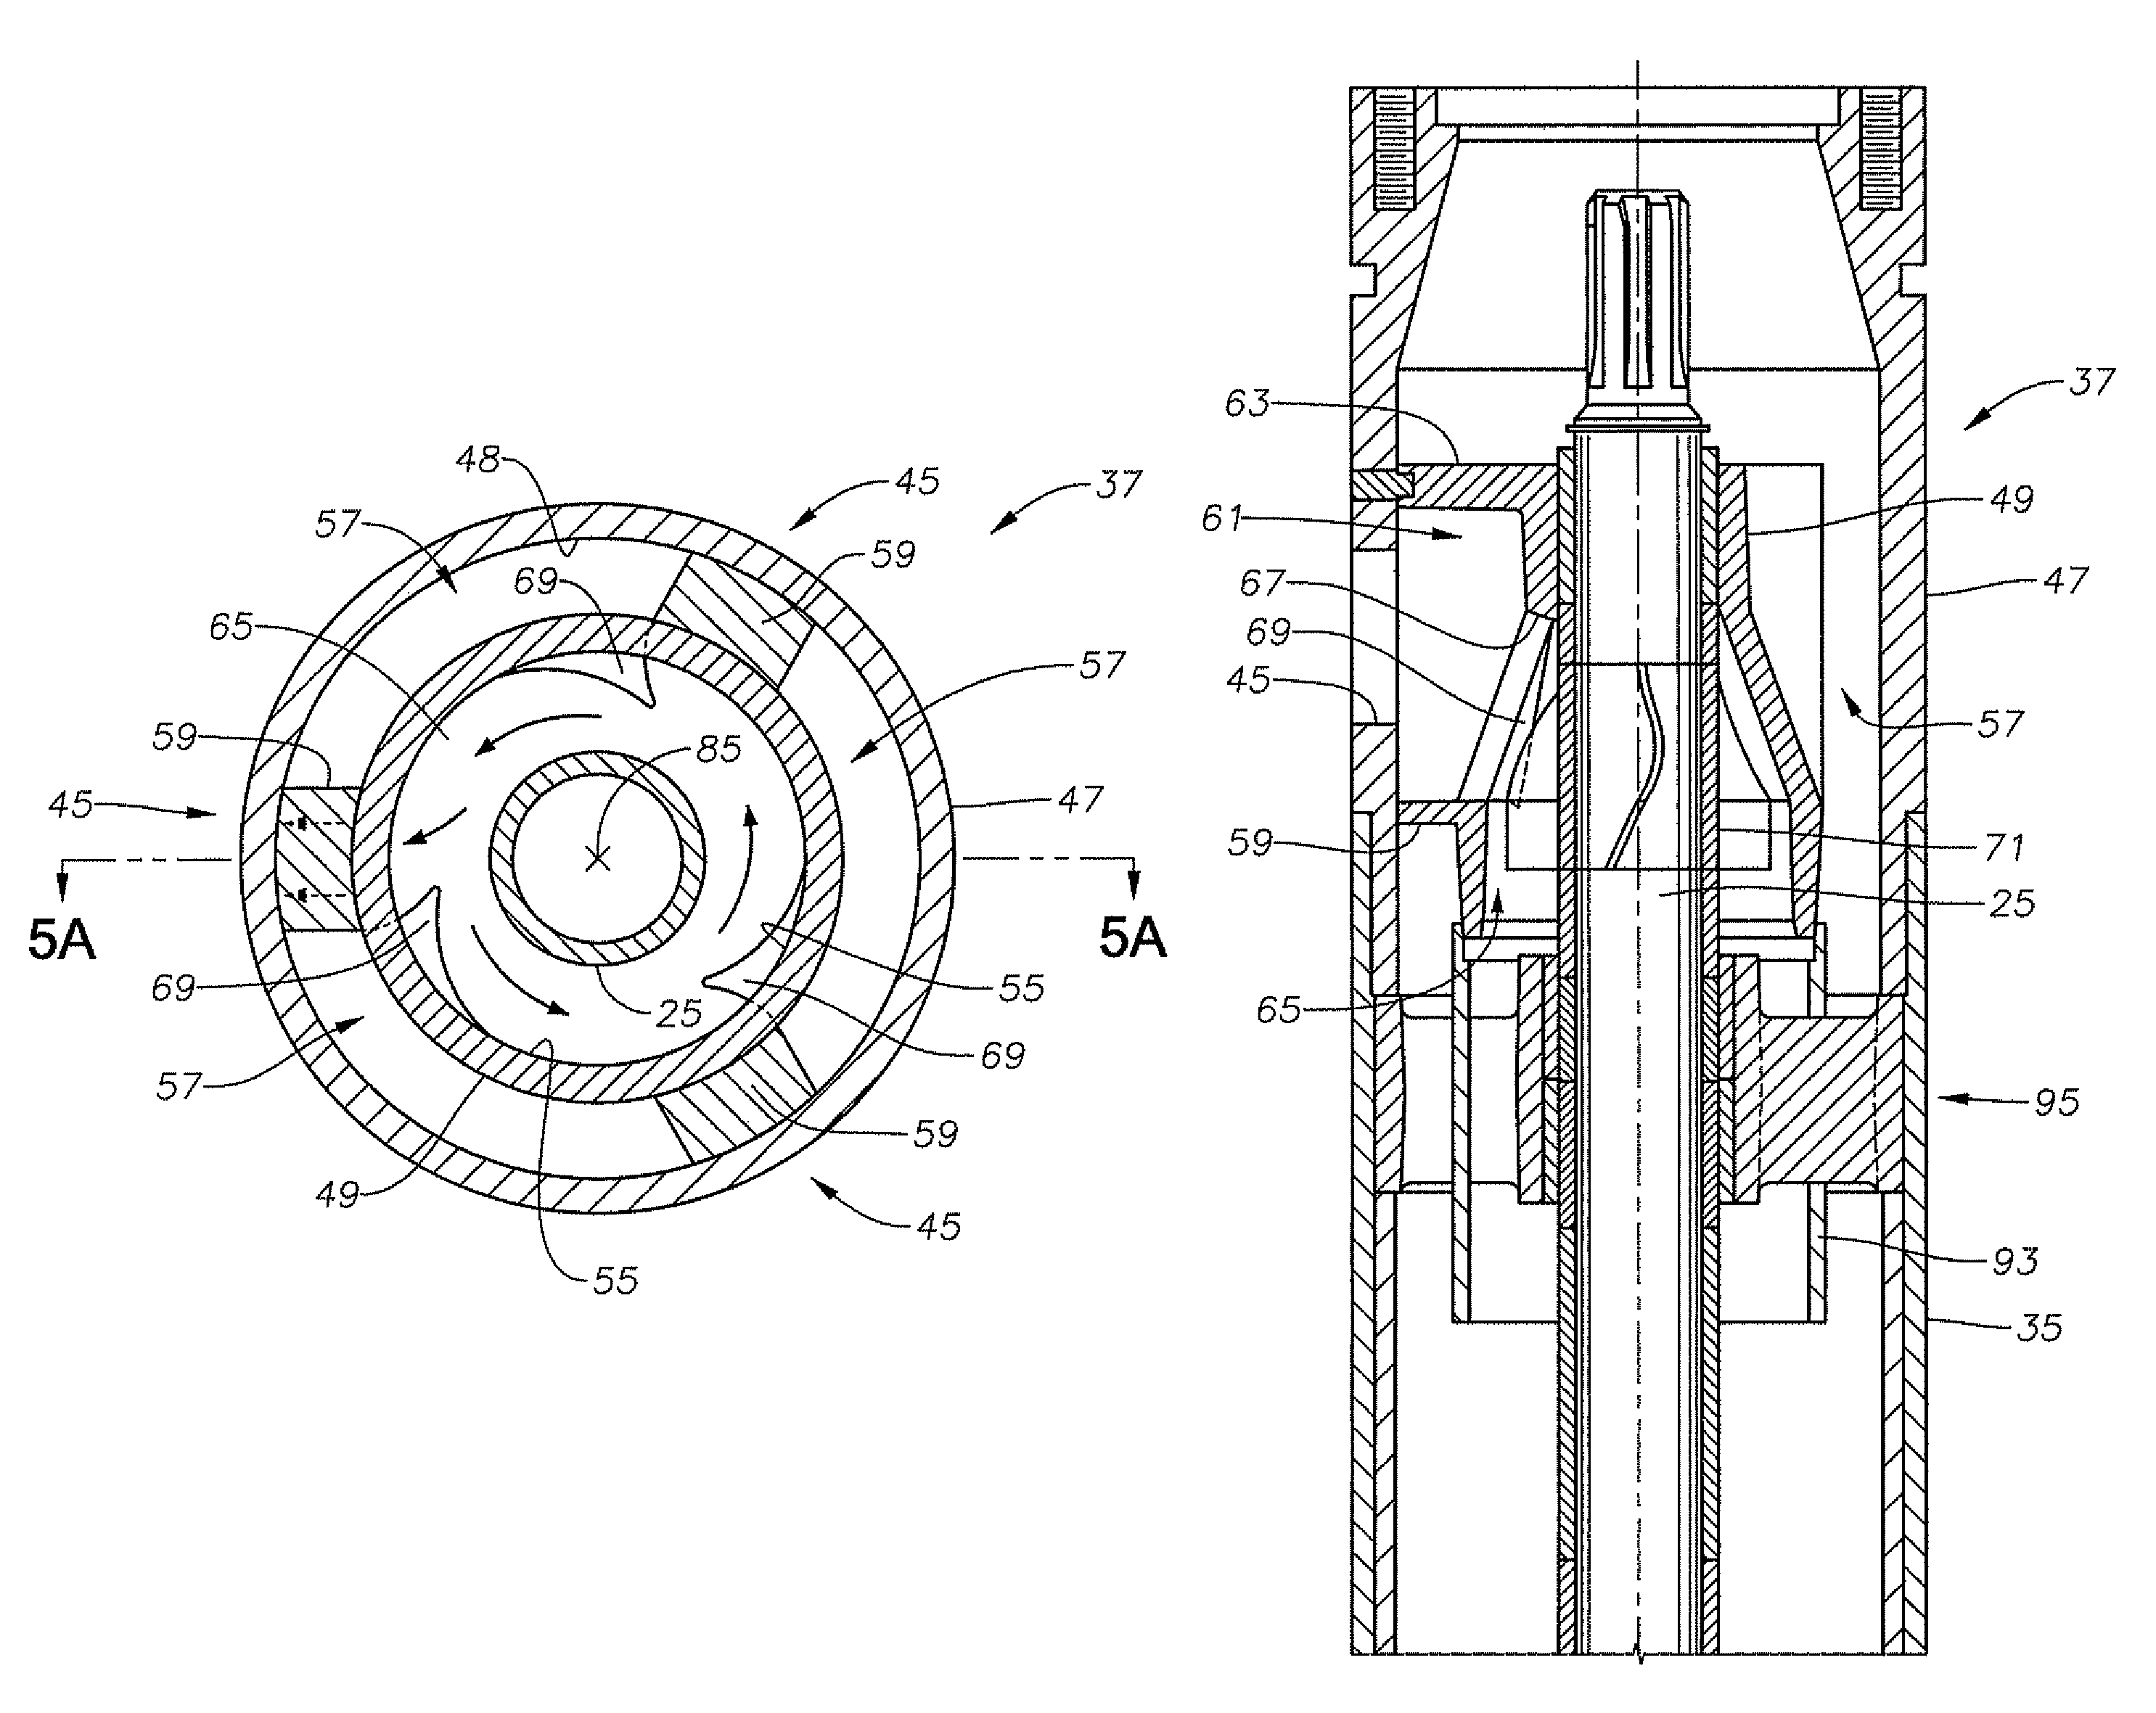 Gas separator with improved flow path efficiency